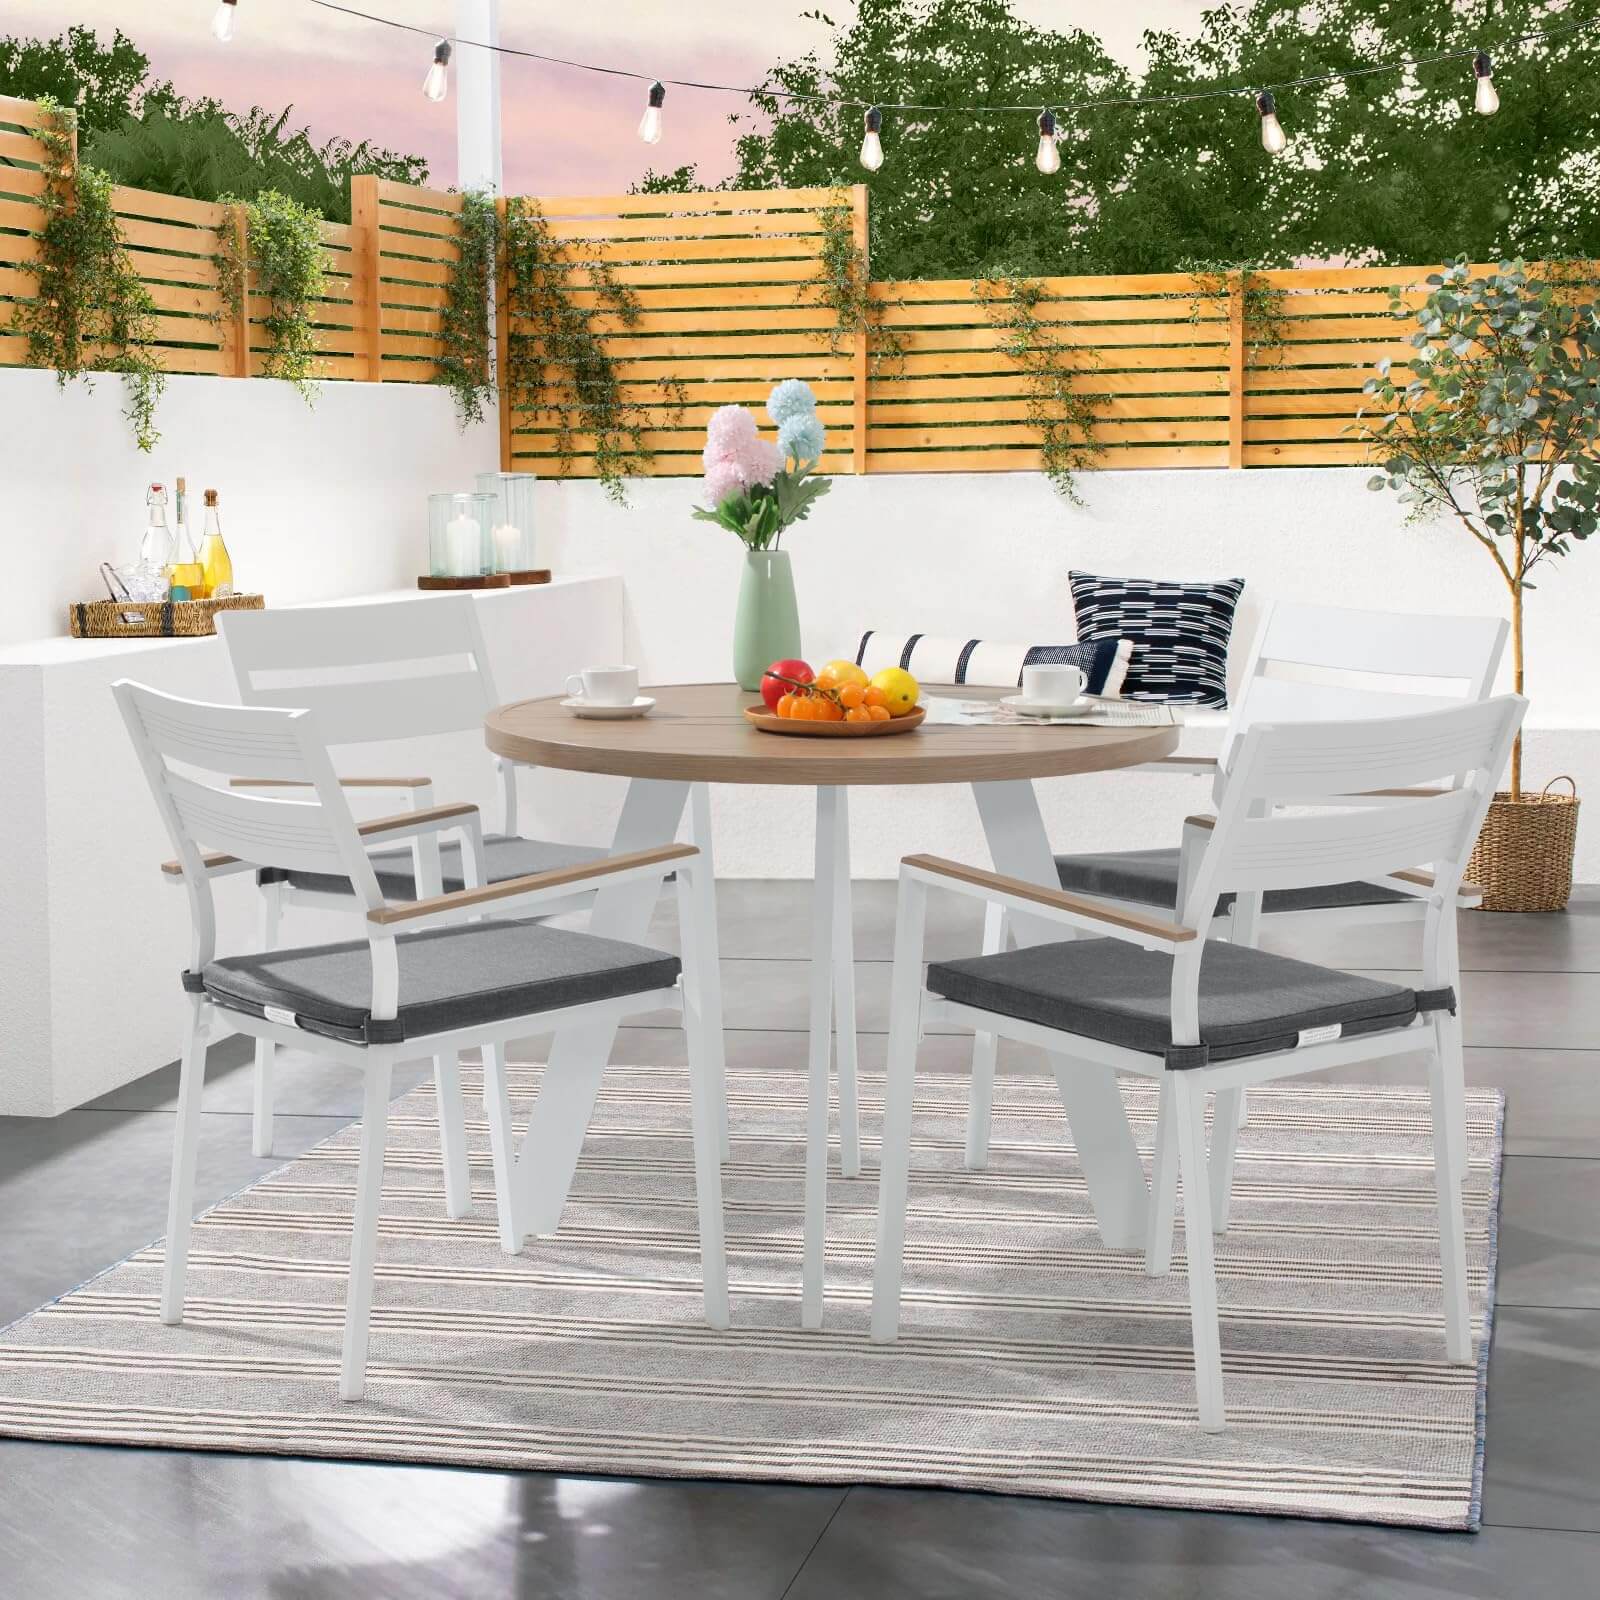 5 Piece Aluminum Patio Dining Set, Outdoor Furniture Set with 4 Chairs and Table